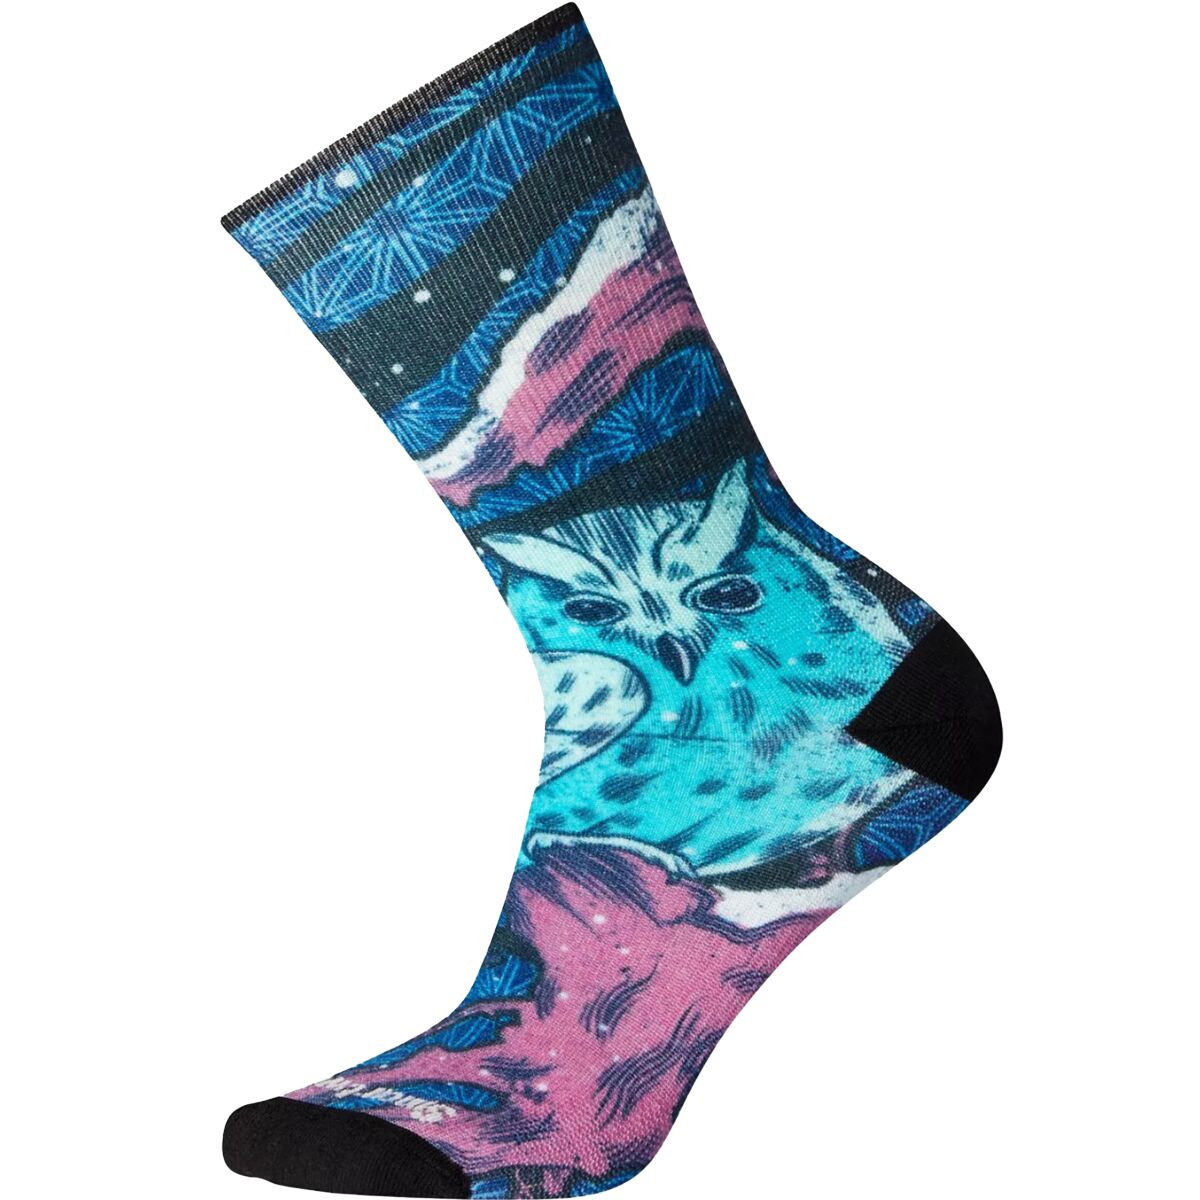 Smartwool Curated Owl Graphic Crew Sock - Women's